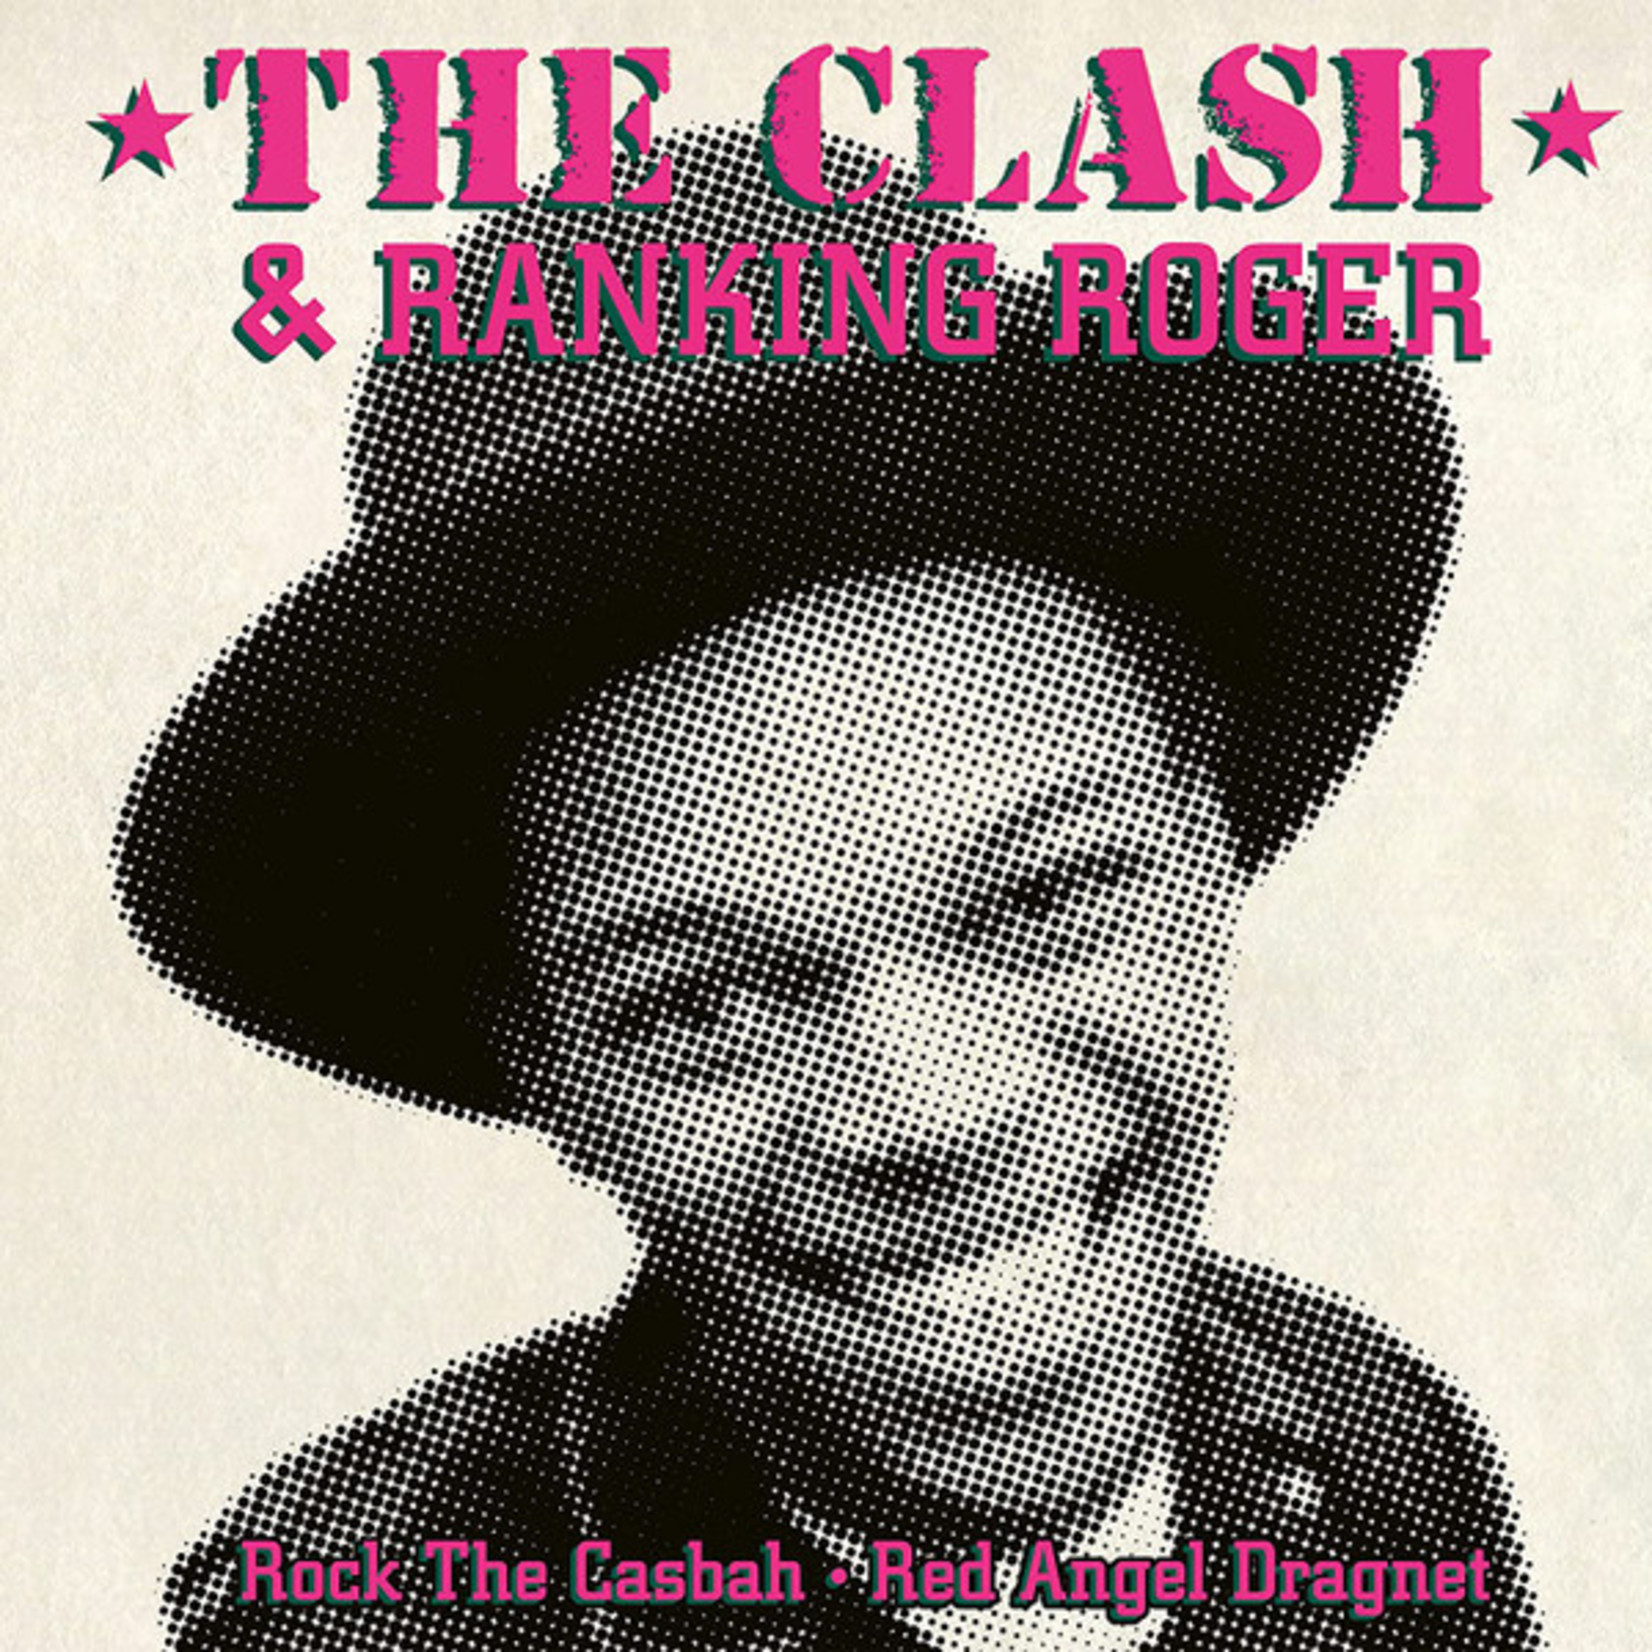 The Clash & Ranking Roger – Rock The Casbah • Red Angel Dragnet